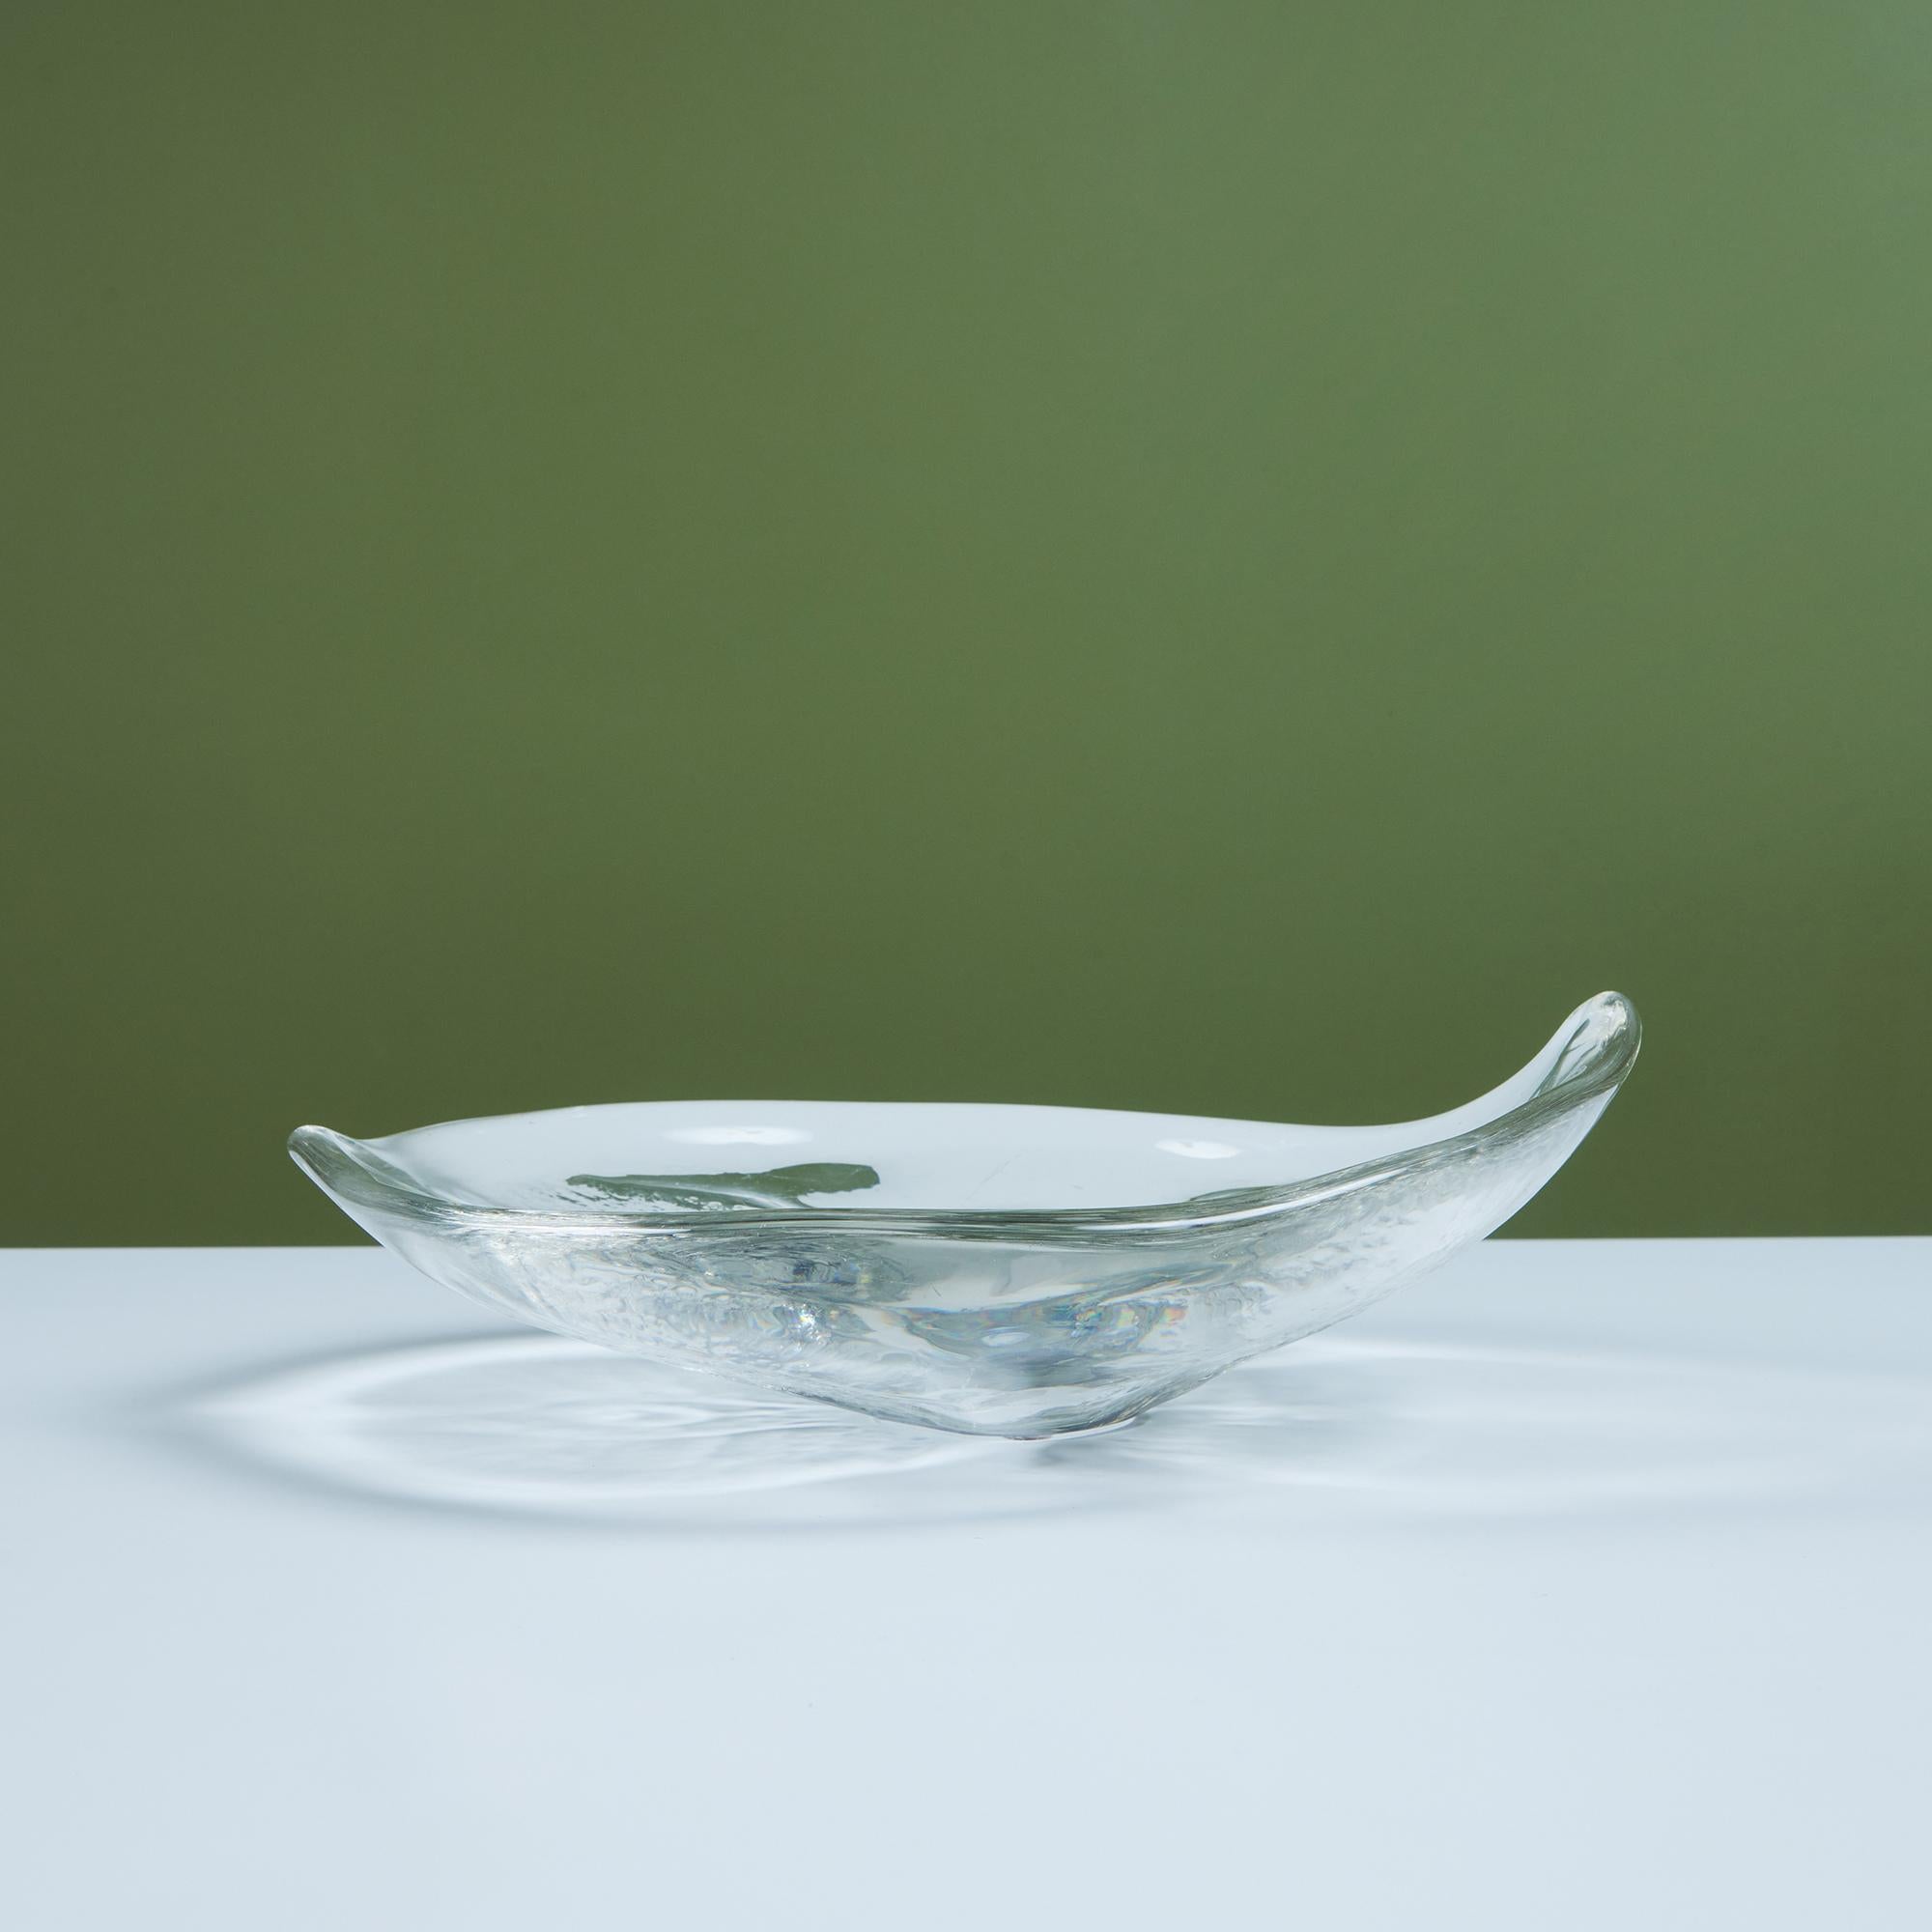 Round glass bowl features a sleek body that tapers towards two sides. The underside of the bowl is impressed with a leaf like design. 
Signed - on the bottom.

Dimensions
11.5